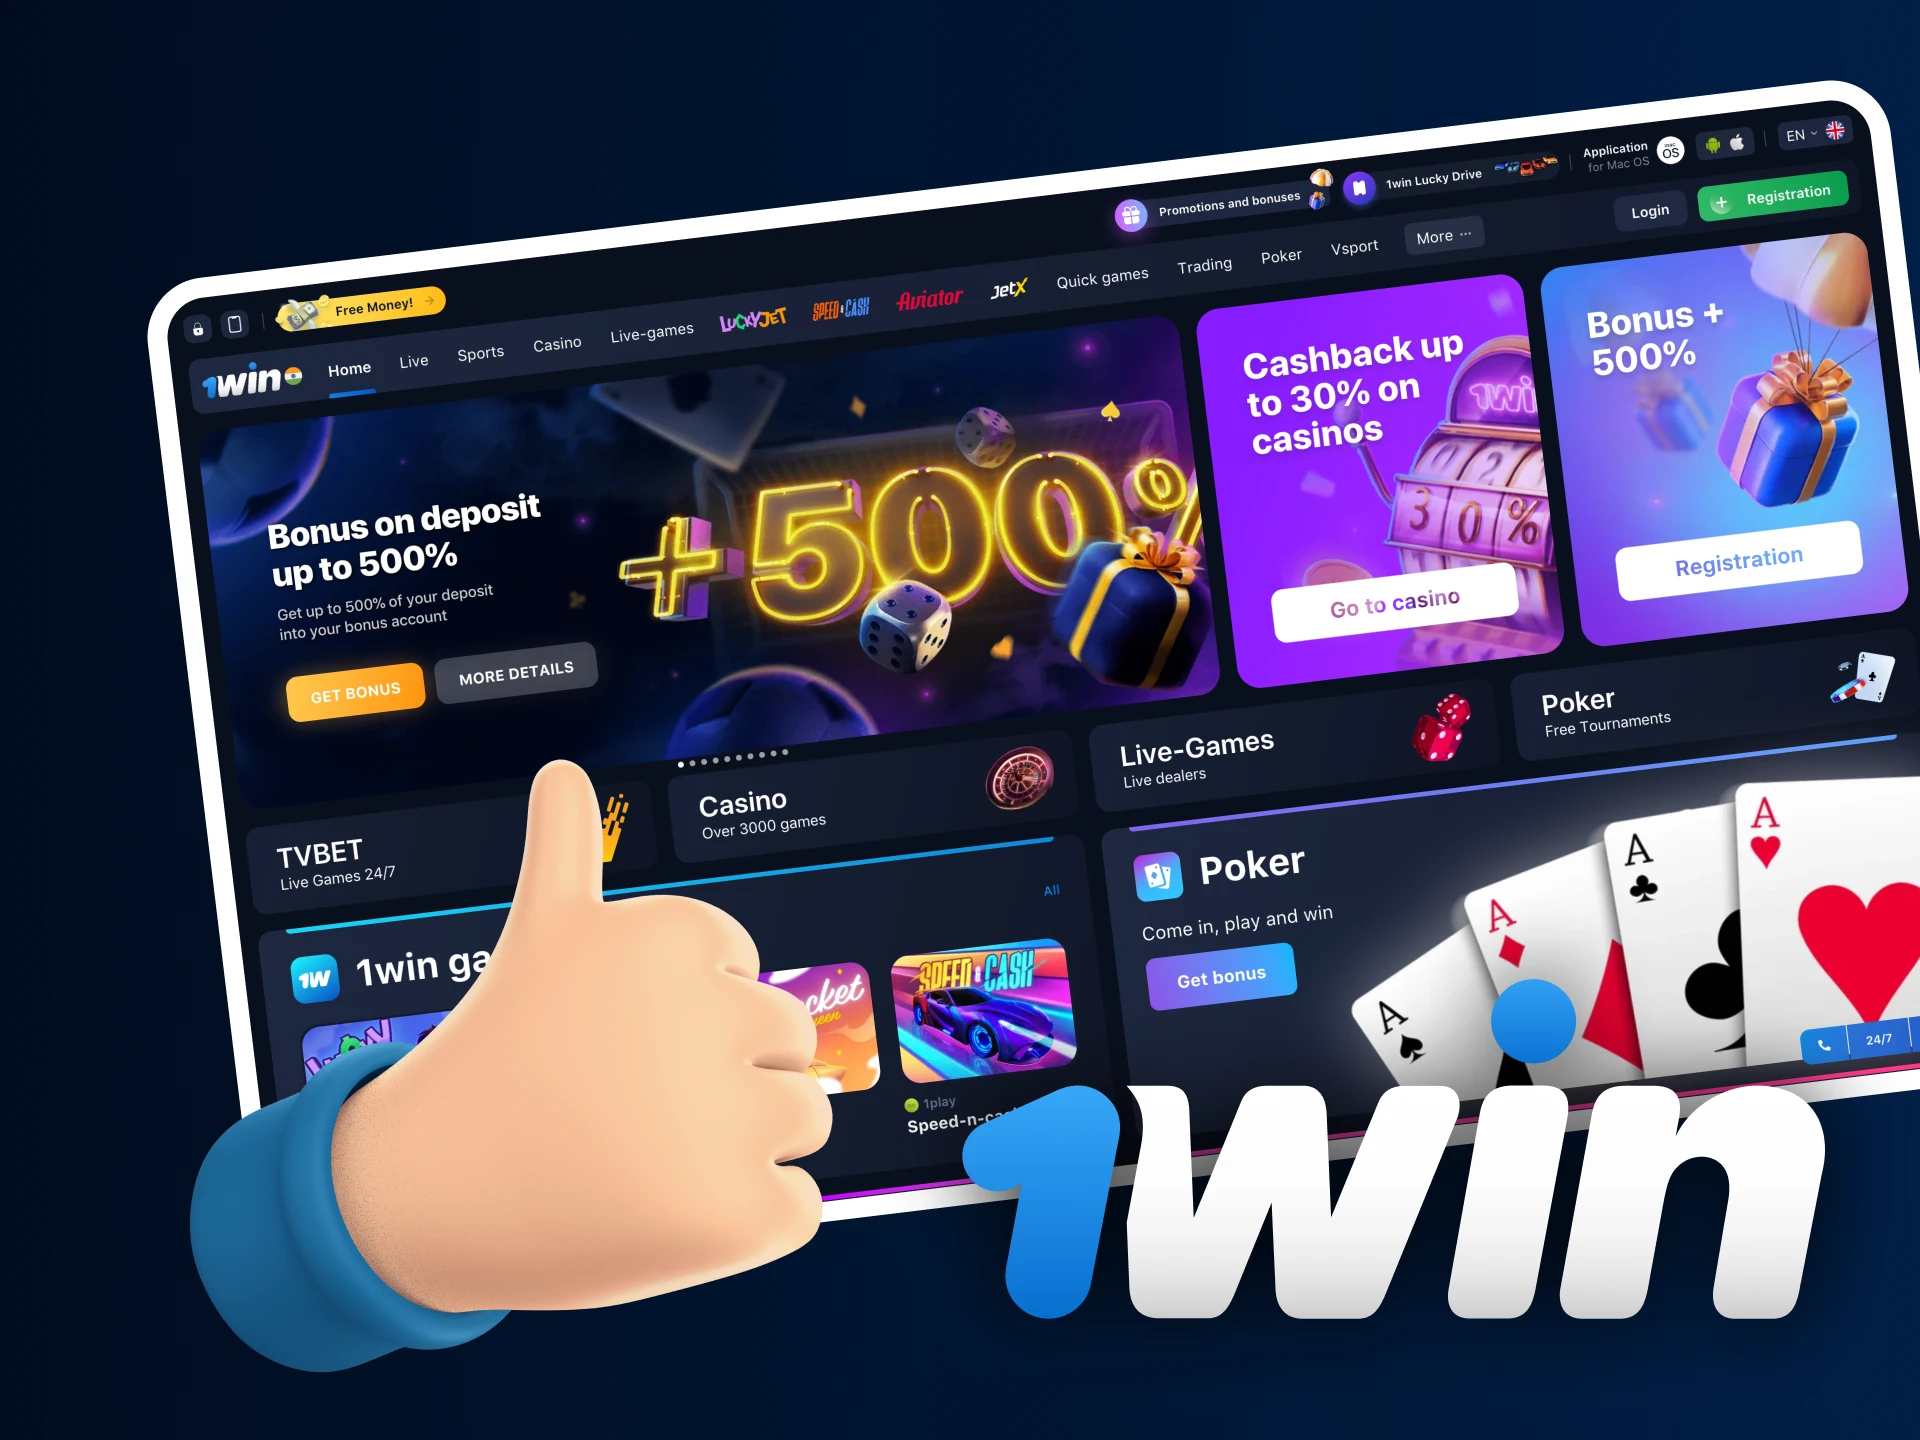 Why choose 1win online casino to bet on IPL matches.